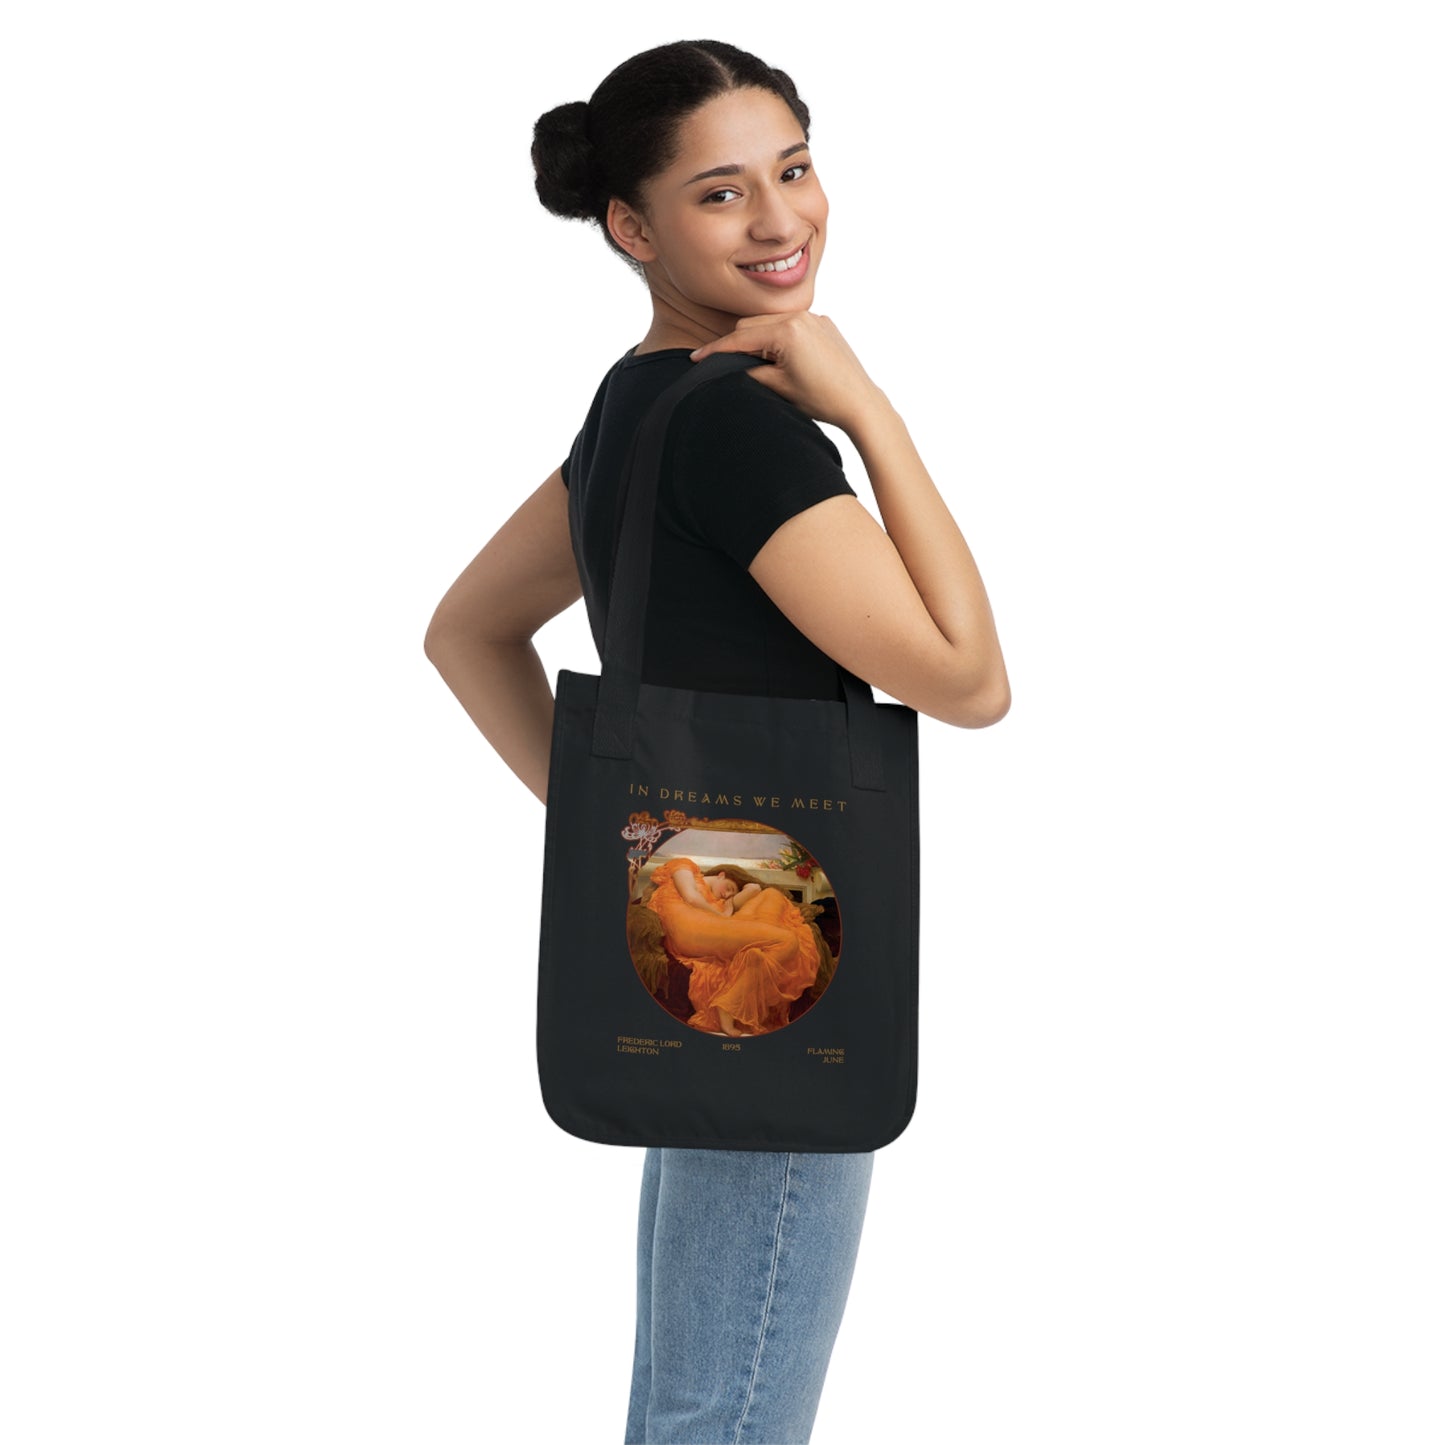 Flaming June by Frederick Leighton - Organic Canvas Tote Bag